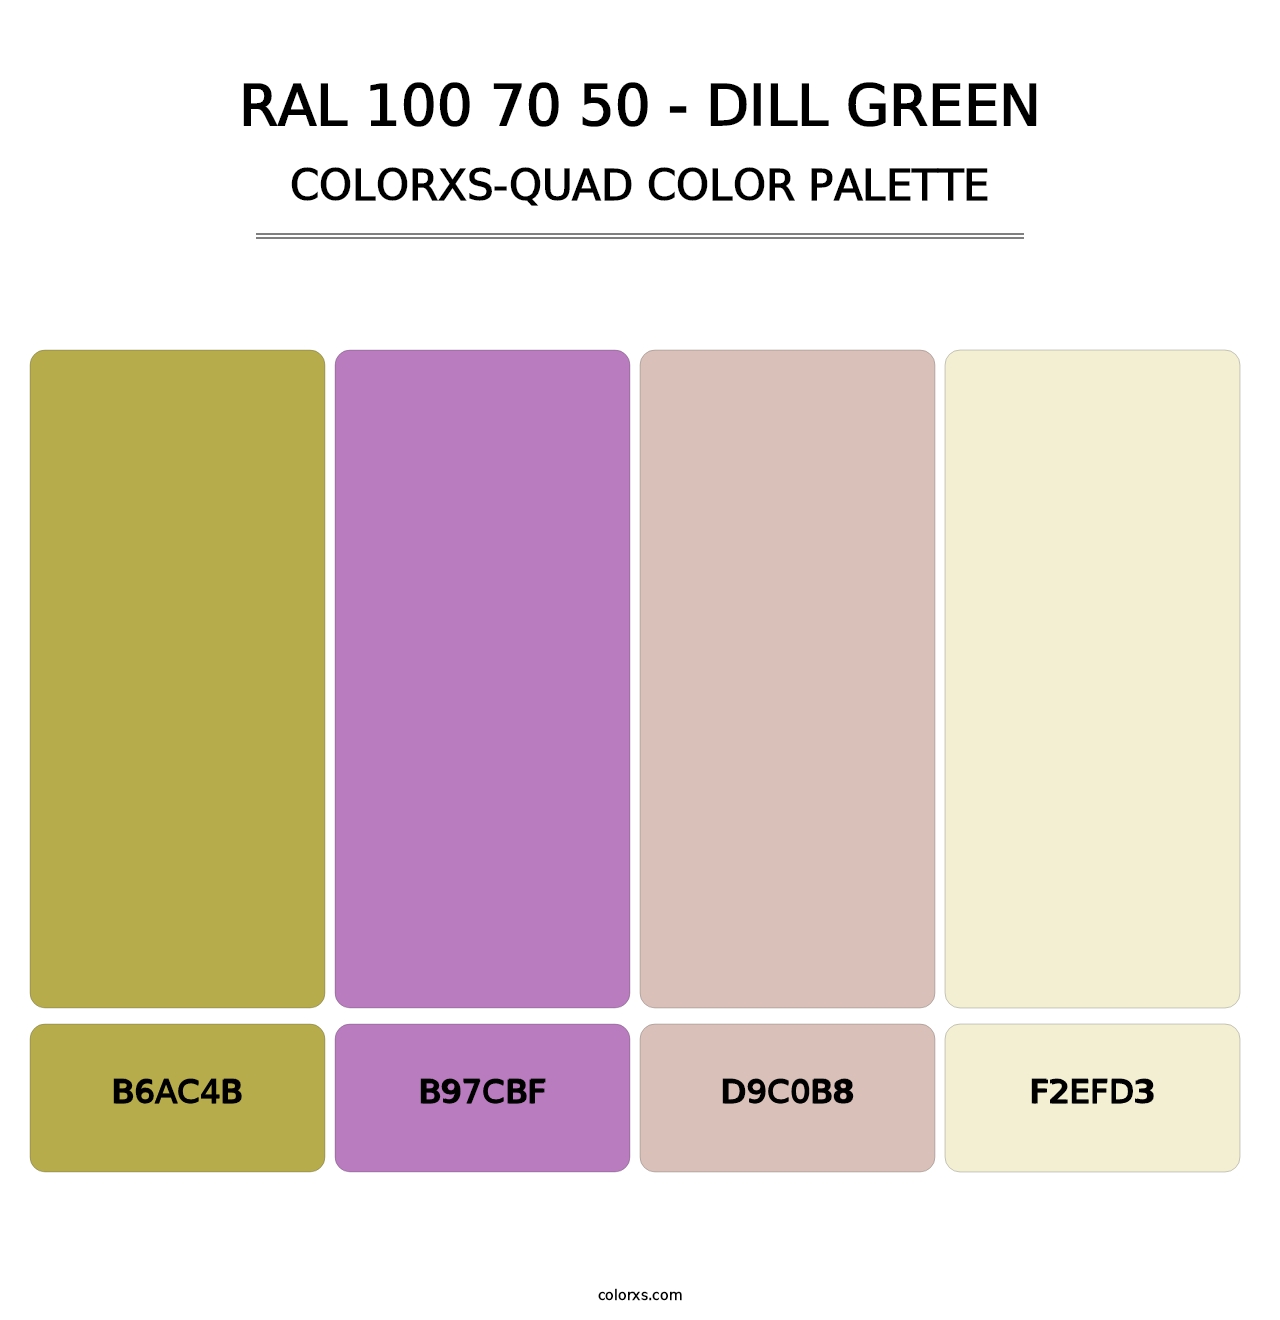 RAL 100 70 50 - Dill Green - Colorxs Quad Palette